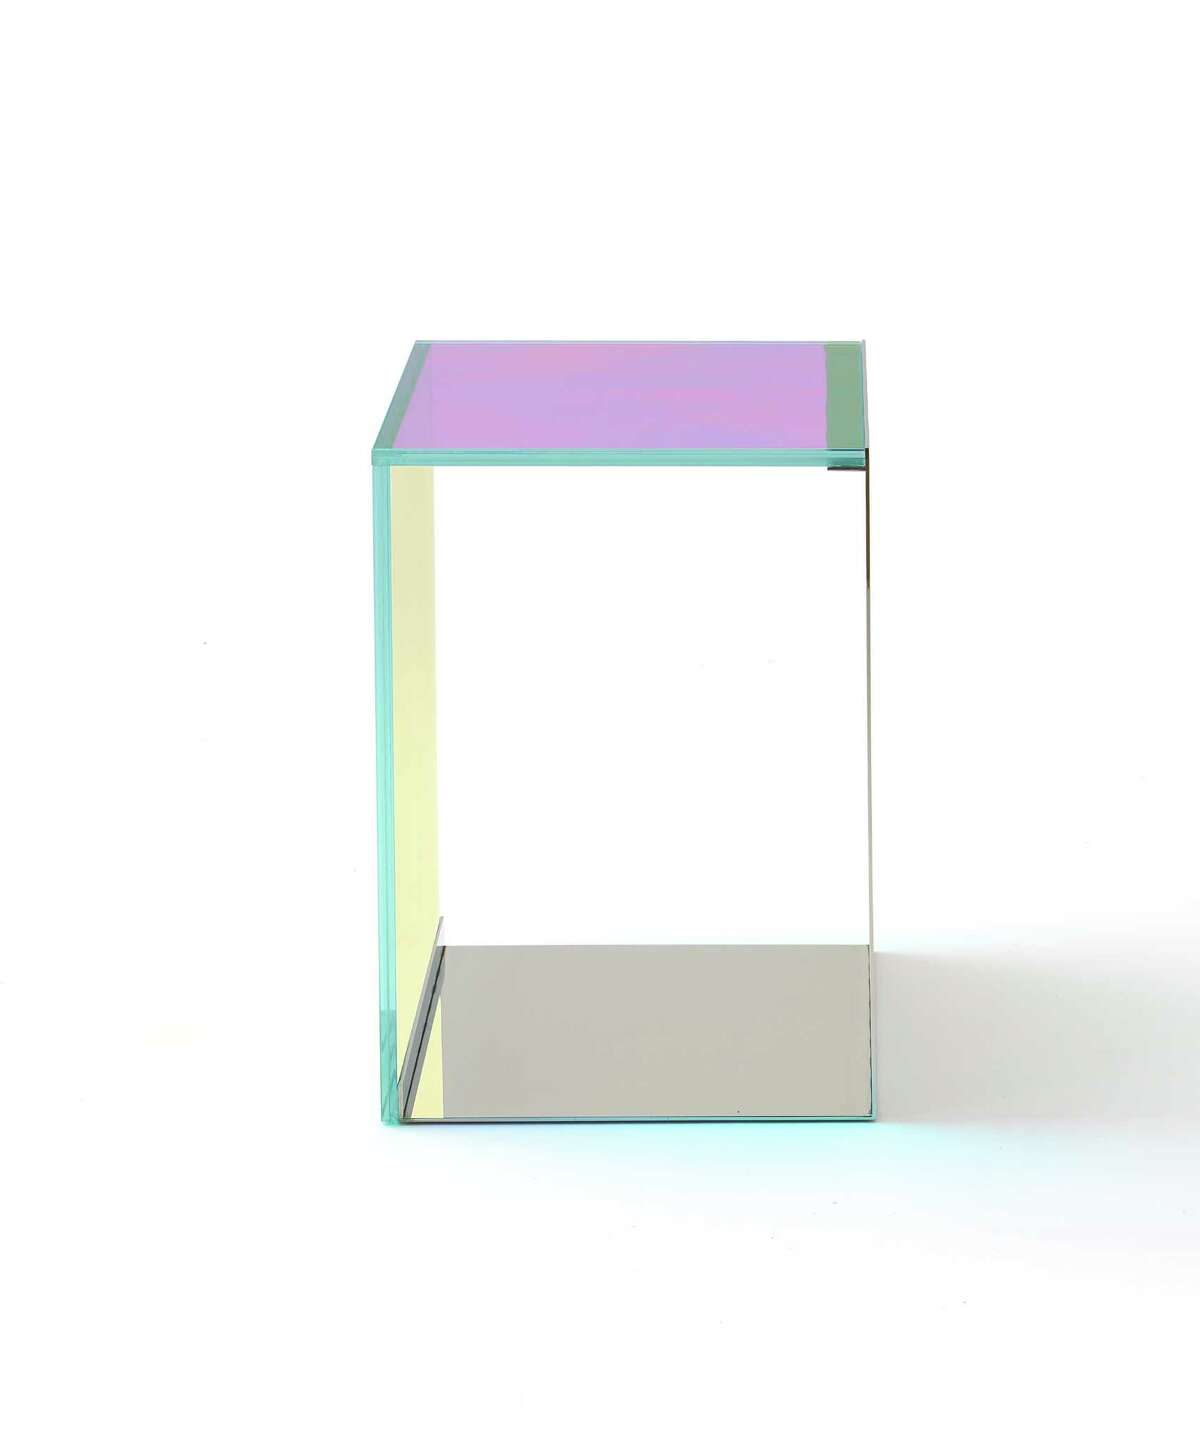 The Dichroic Table, part of the Rottet Collection, is made of dichroic glass and polished metal.